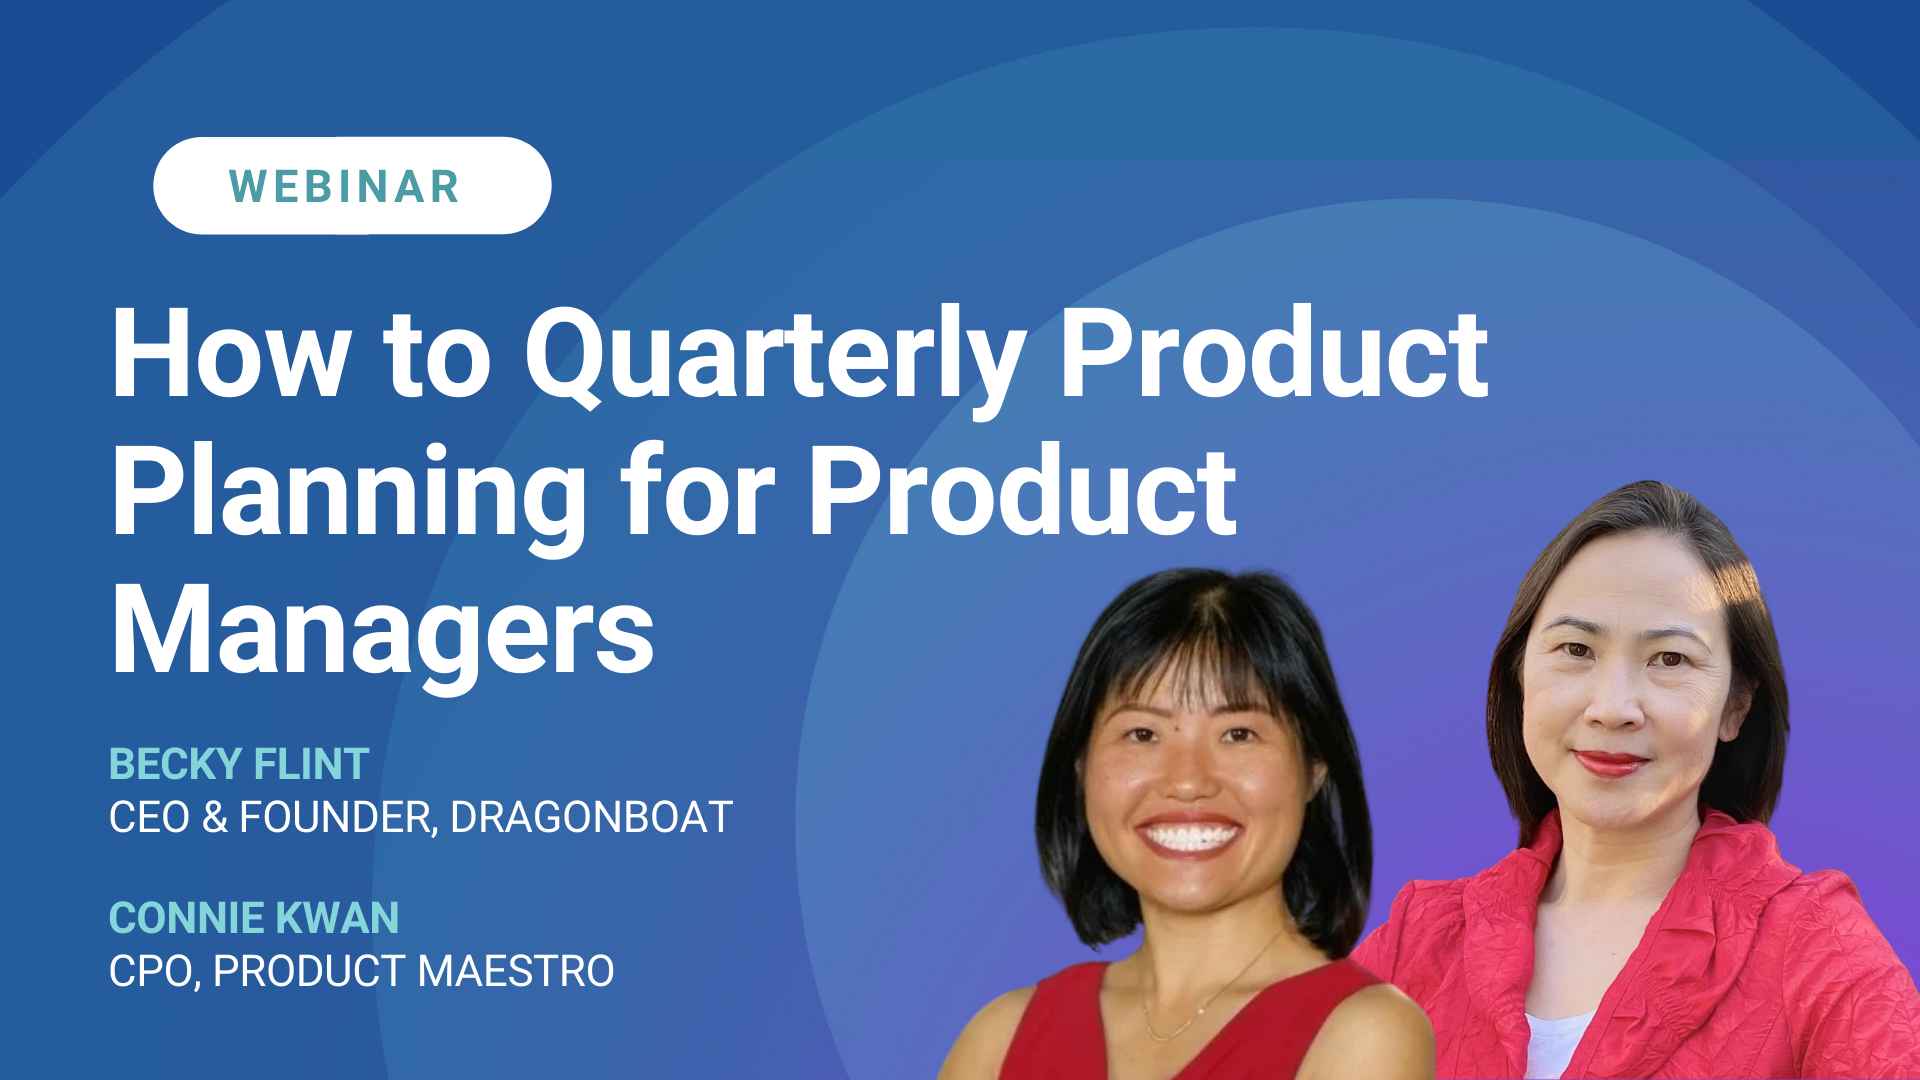 Quarterly product planning for product managers